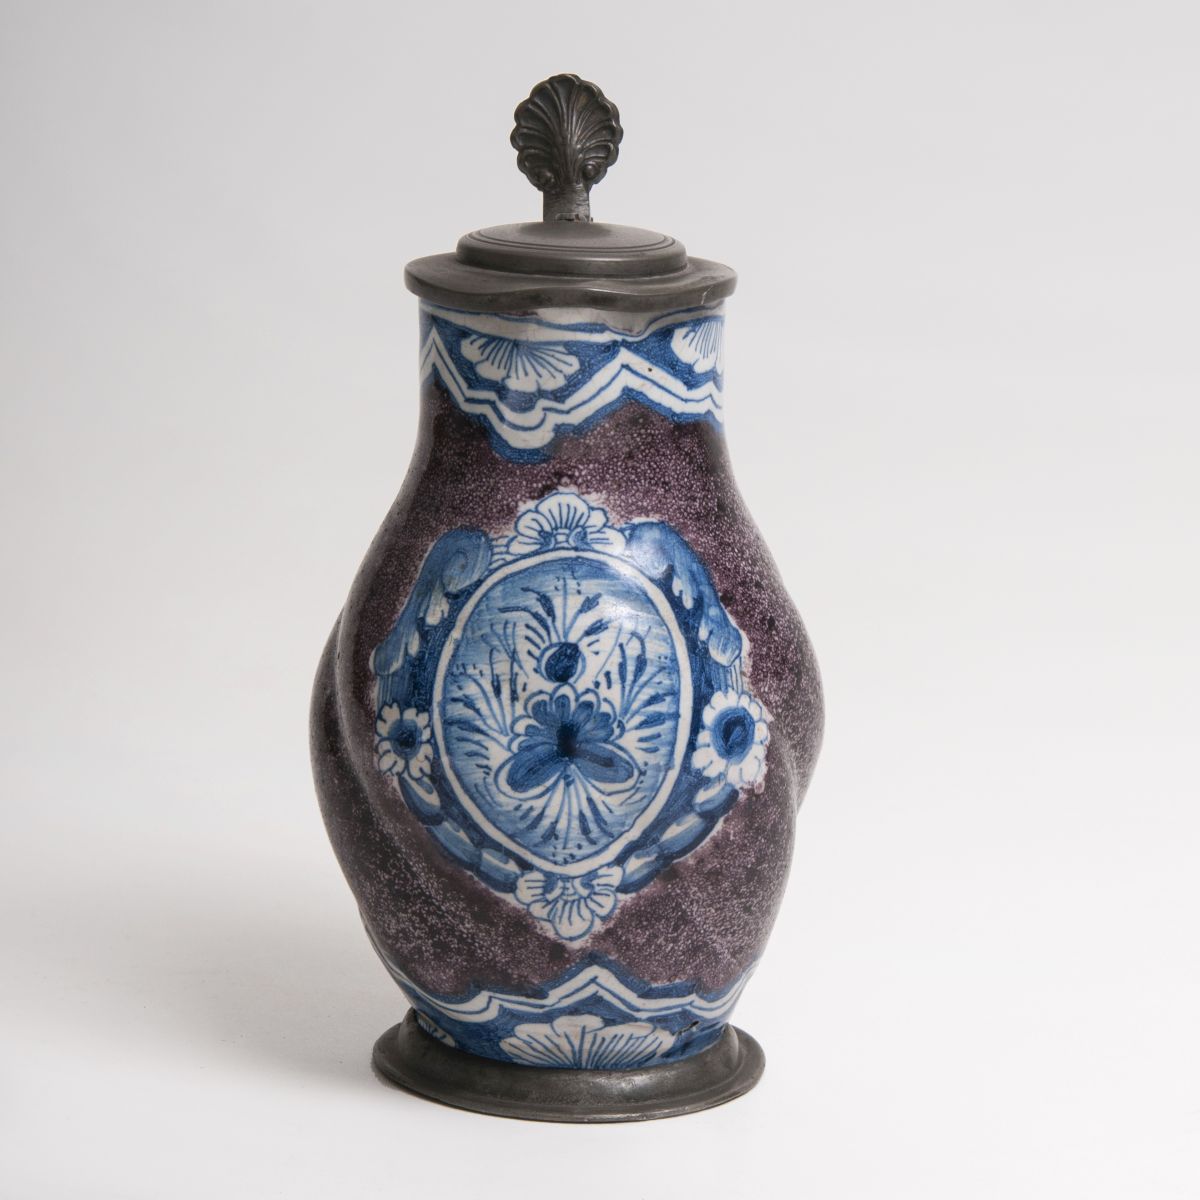 A small pear-shaped jug with speckled ground and blue painting